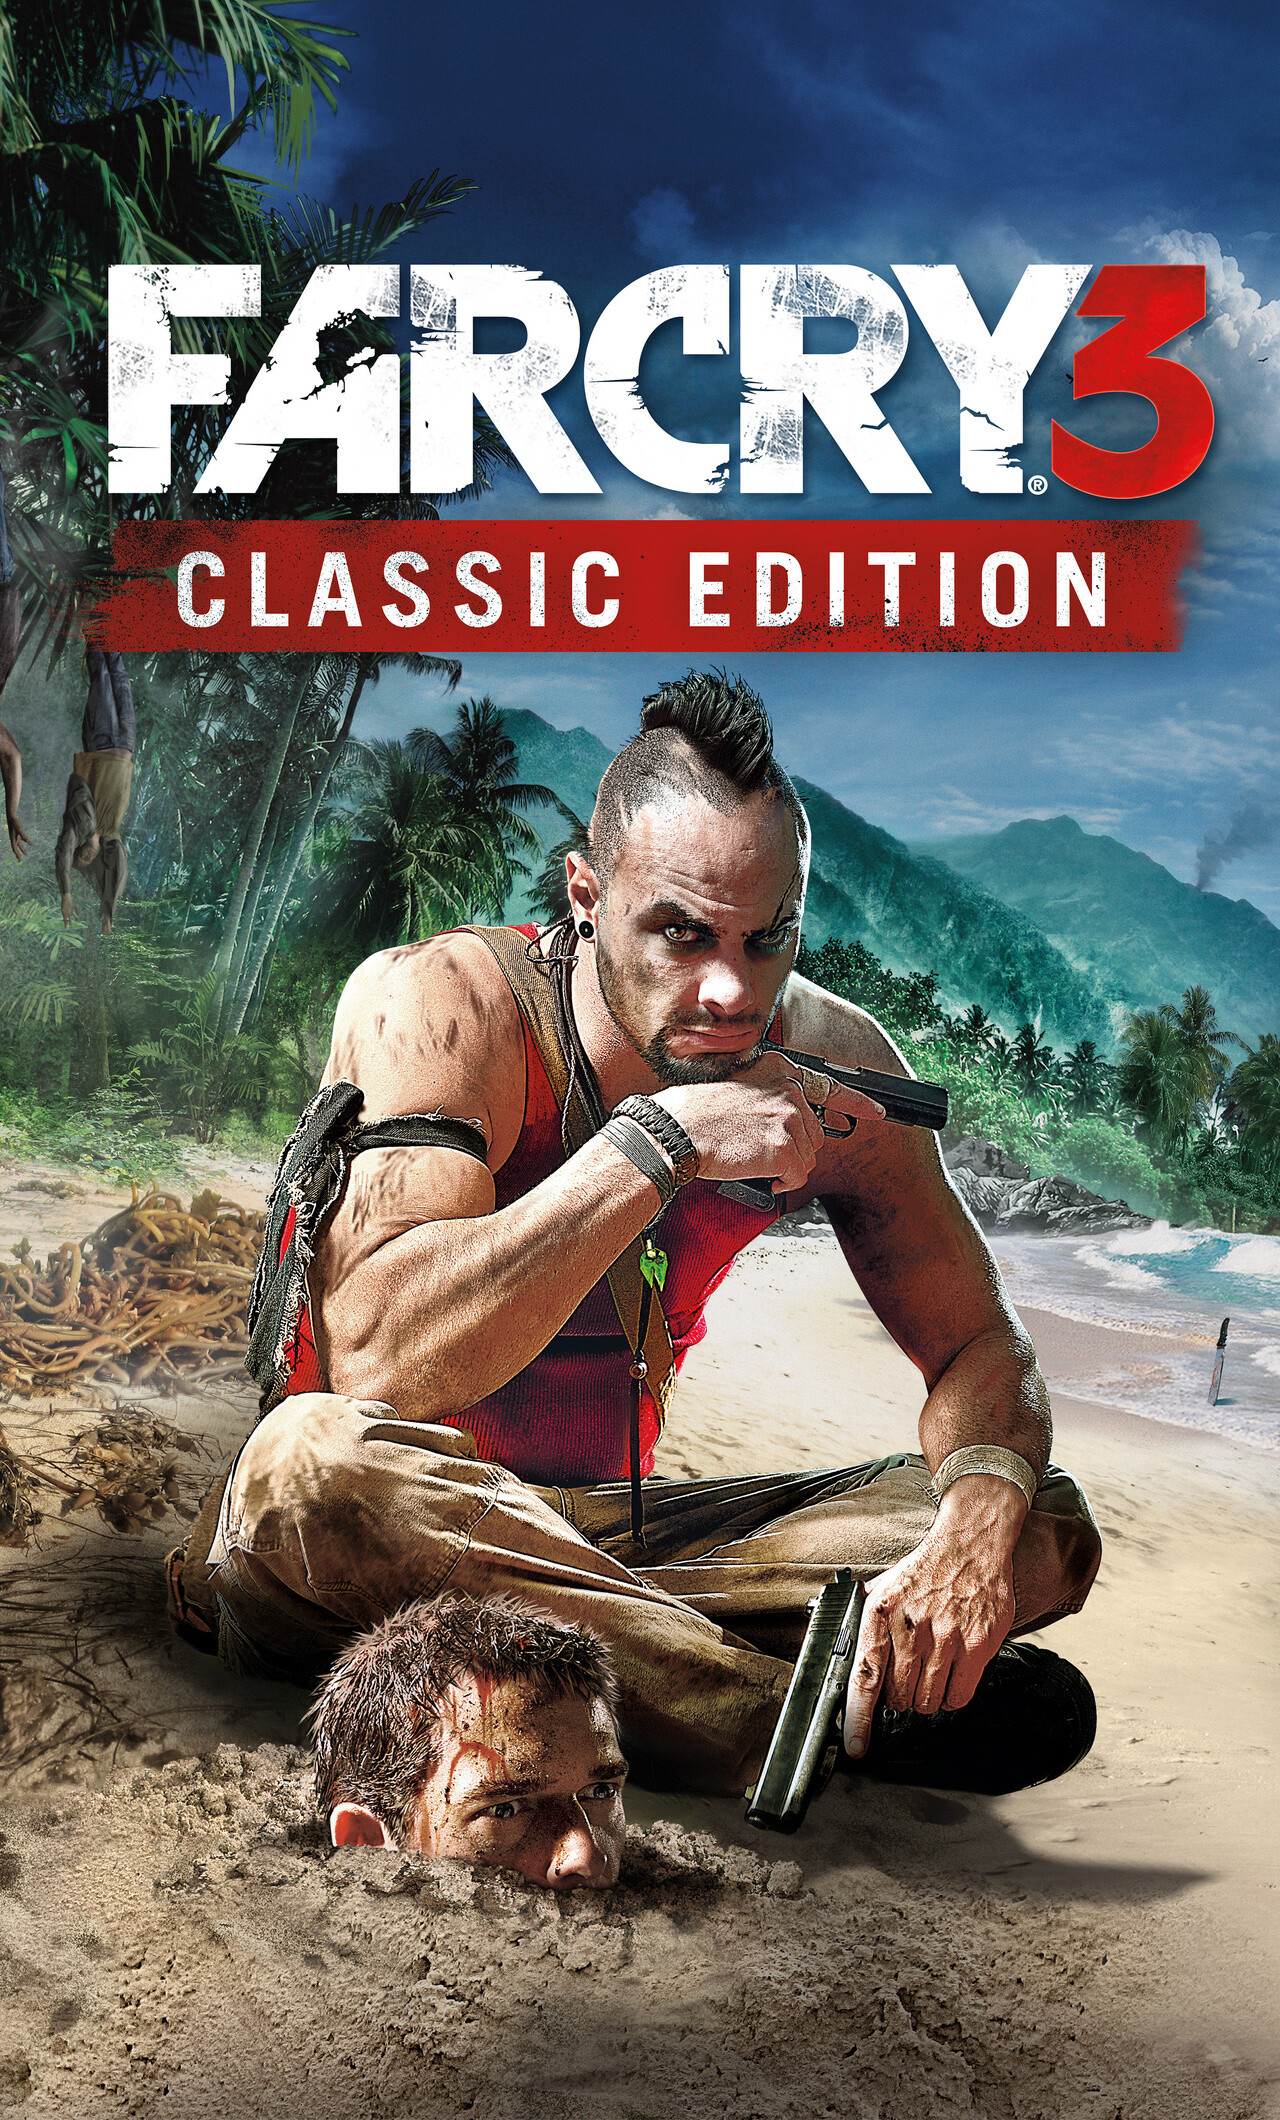 Far Cry 3: Protagonist Jason Brody must save his friends, who have been kidnapped by pirates, and escape from the island and its unhinged inhabitants. 1280x2120 HD Wallpaper.